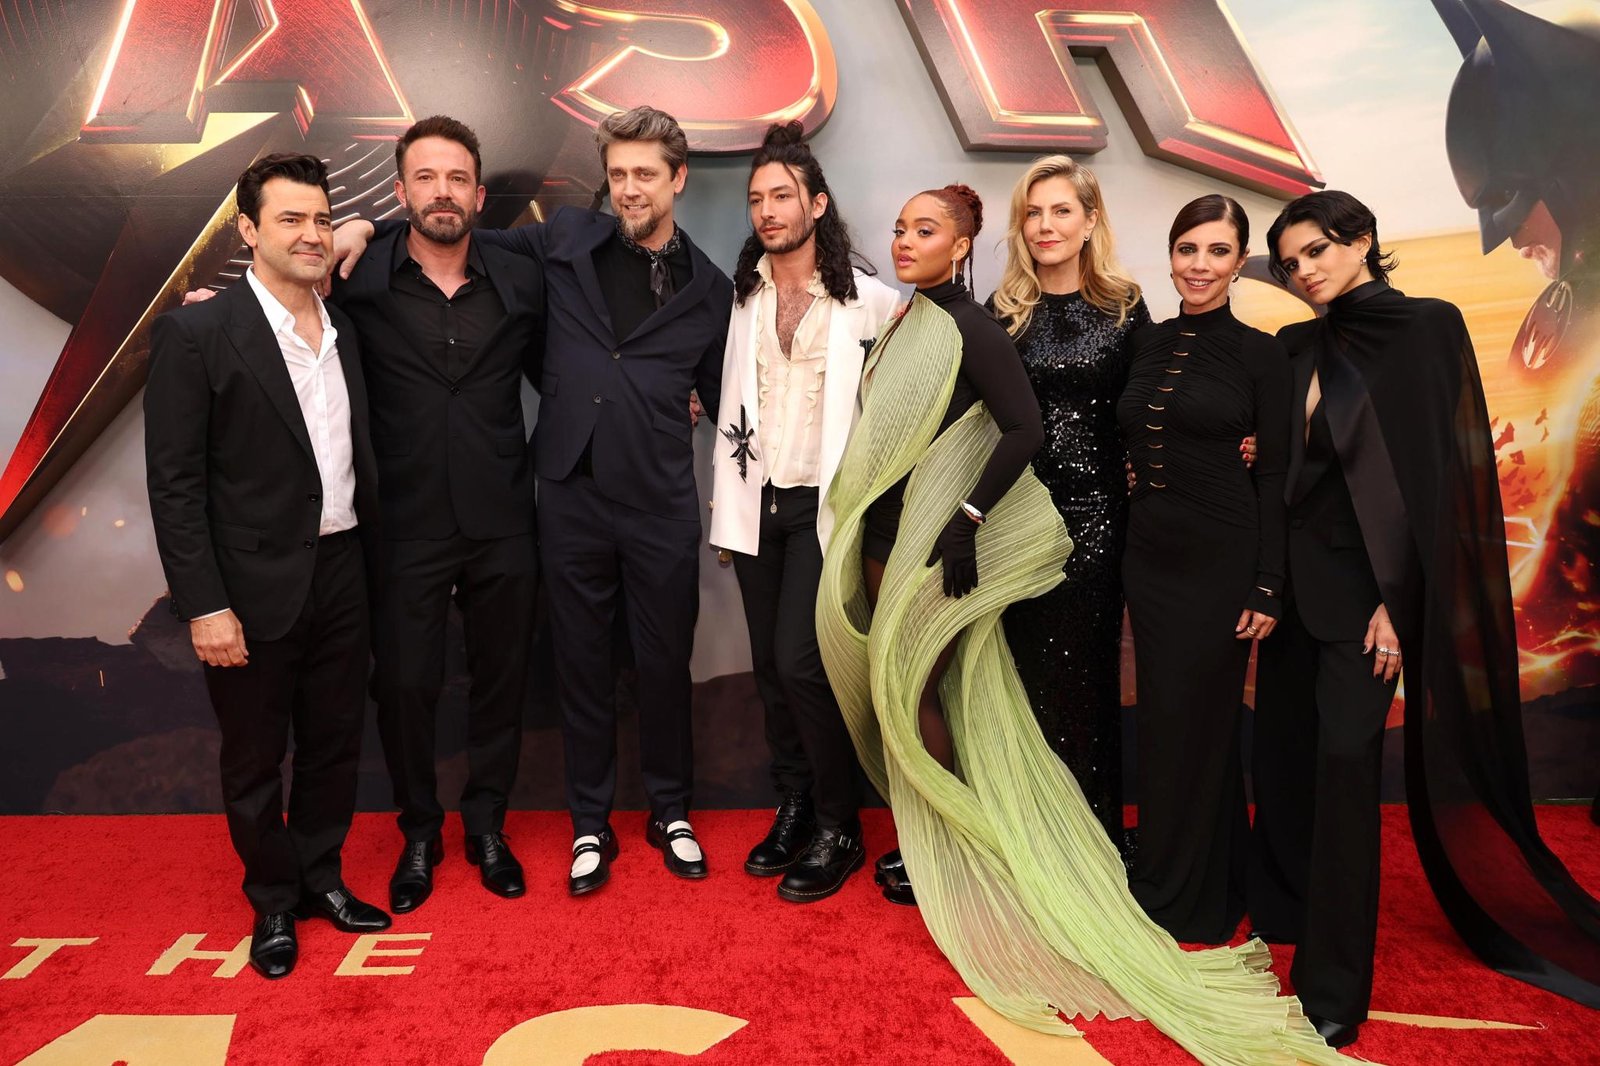 Ezra Miller walks "The Flash" red carpet with co-stars